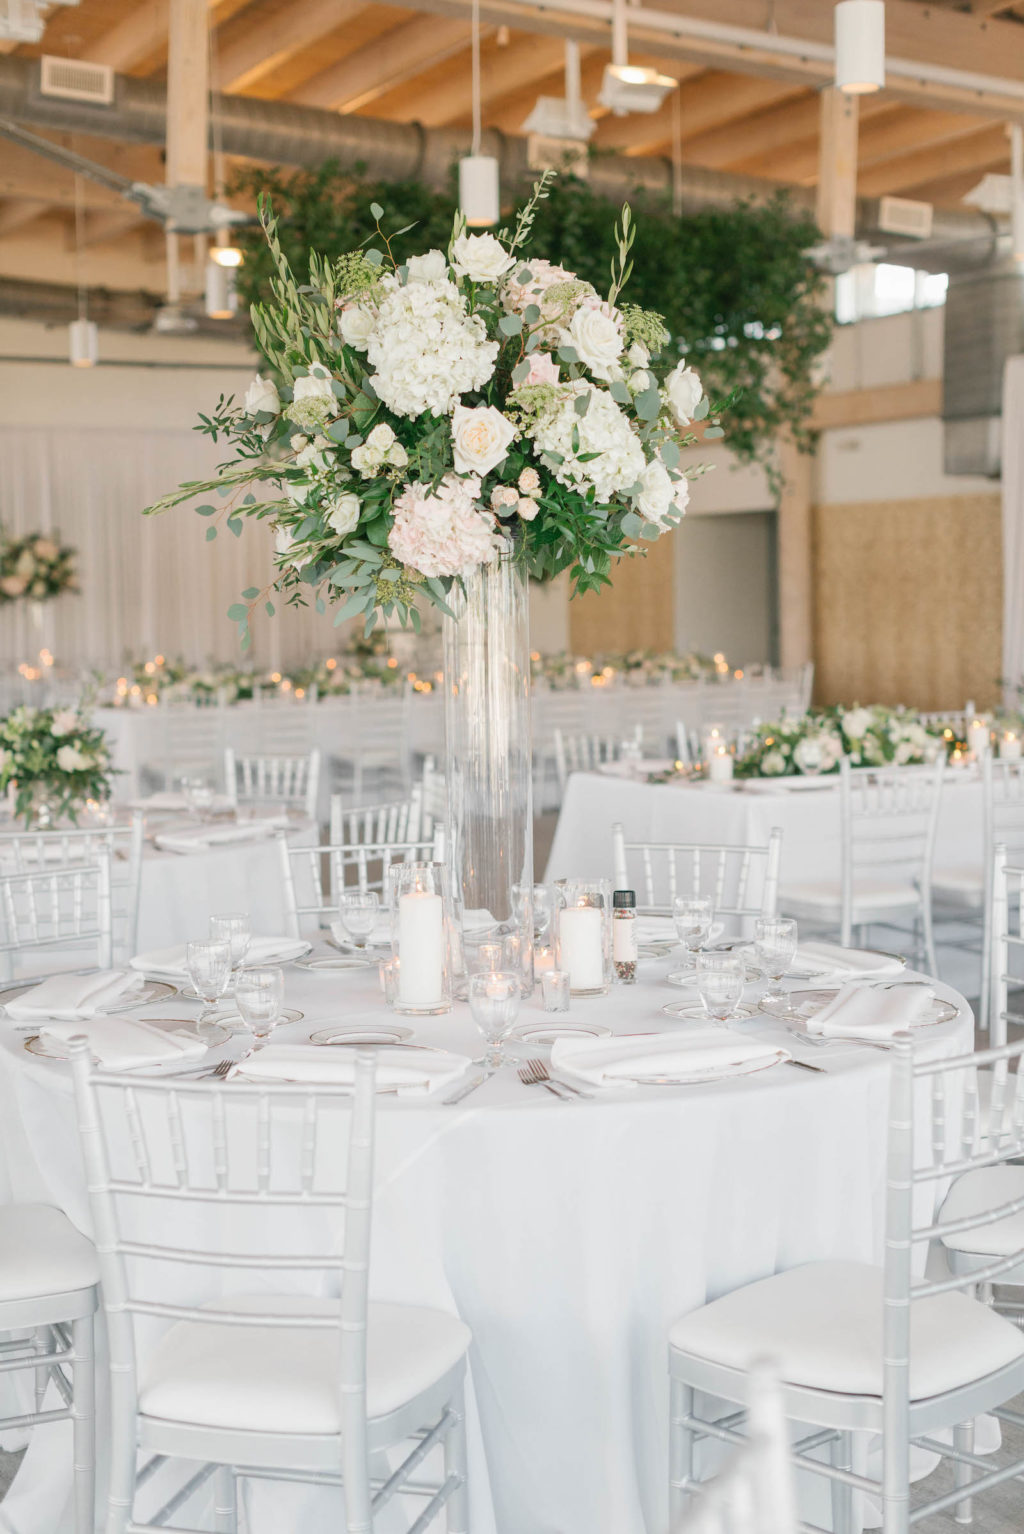 Elegant Boho Chic Wedding Reception Decor, White Linens and Chiavari Chairs, Tall Glass Cylinder Vase with Lush Greenery and White Hydrangeas, Blush Pink Roses Floral Centerpiece | Tampa Bay Wedding Florist Bruce Wayne Florals | Luxury Wedding Planner Parties A'la Carte